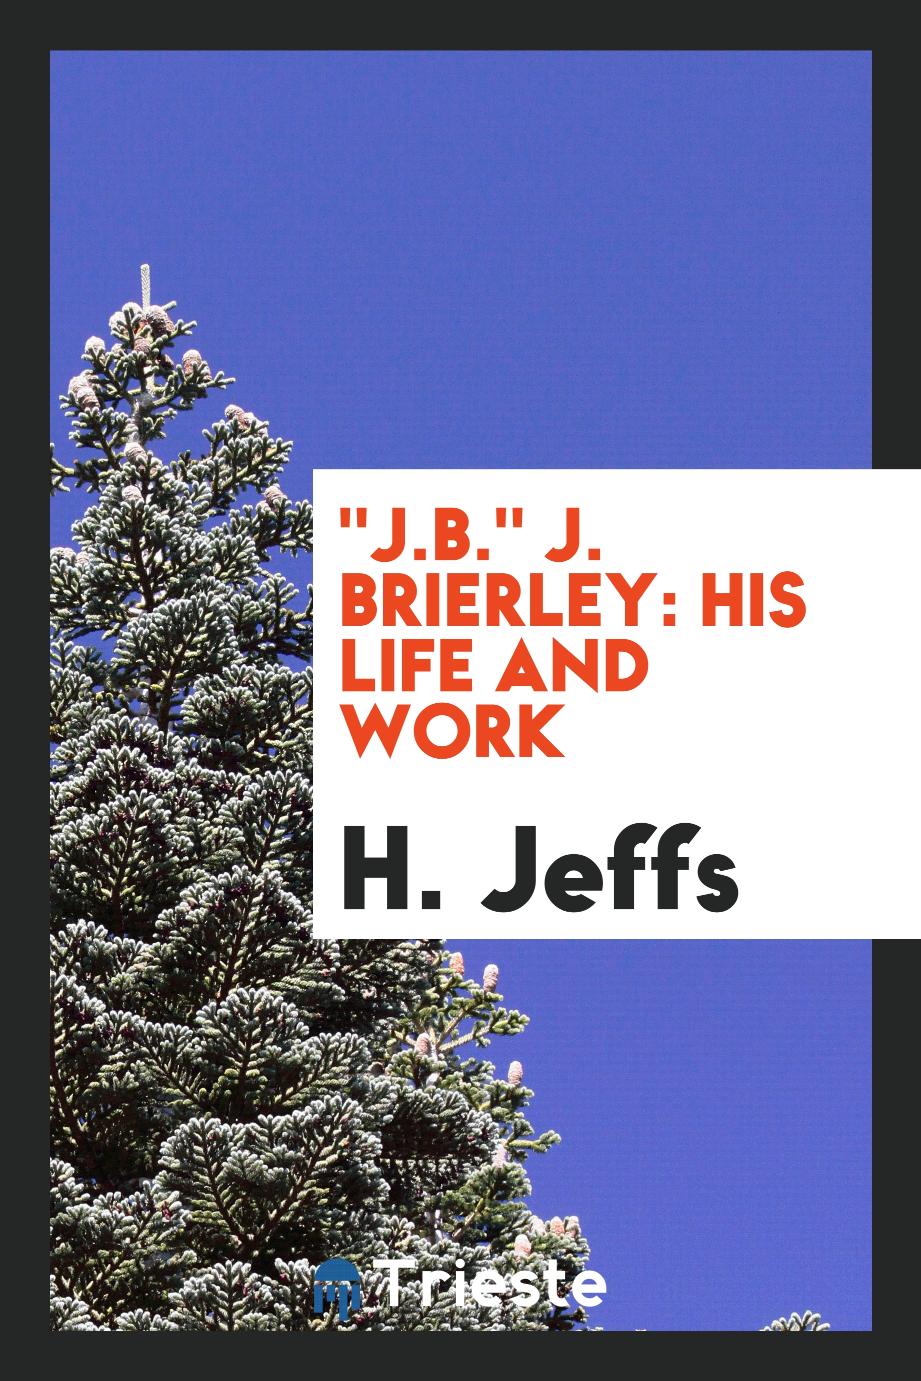 "J.B." J. Brierley: his life and work